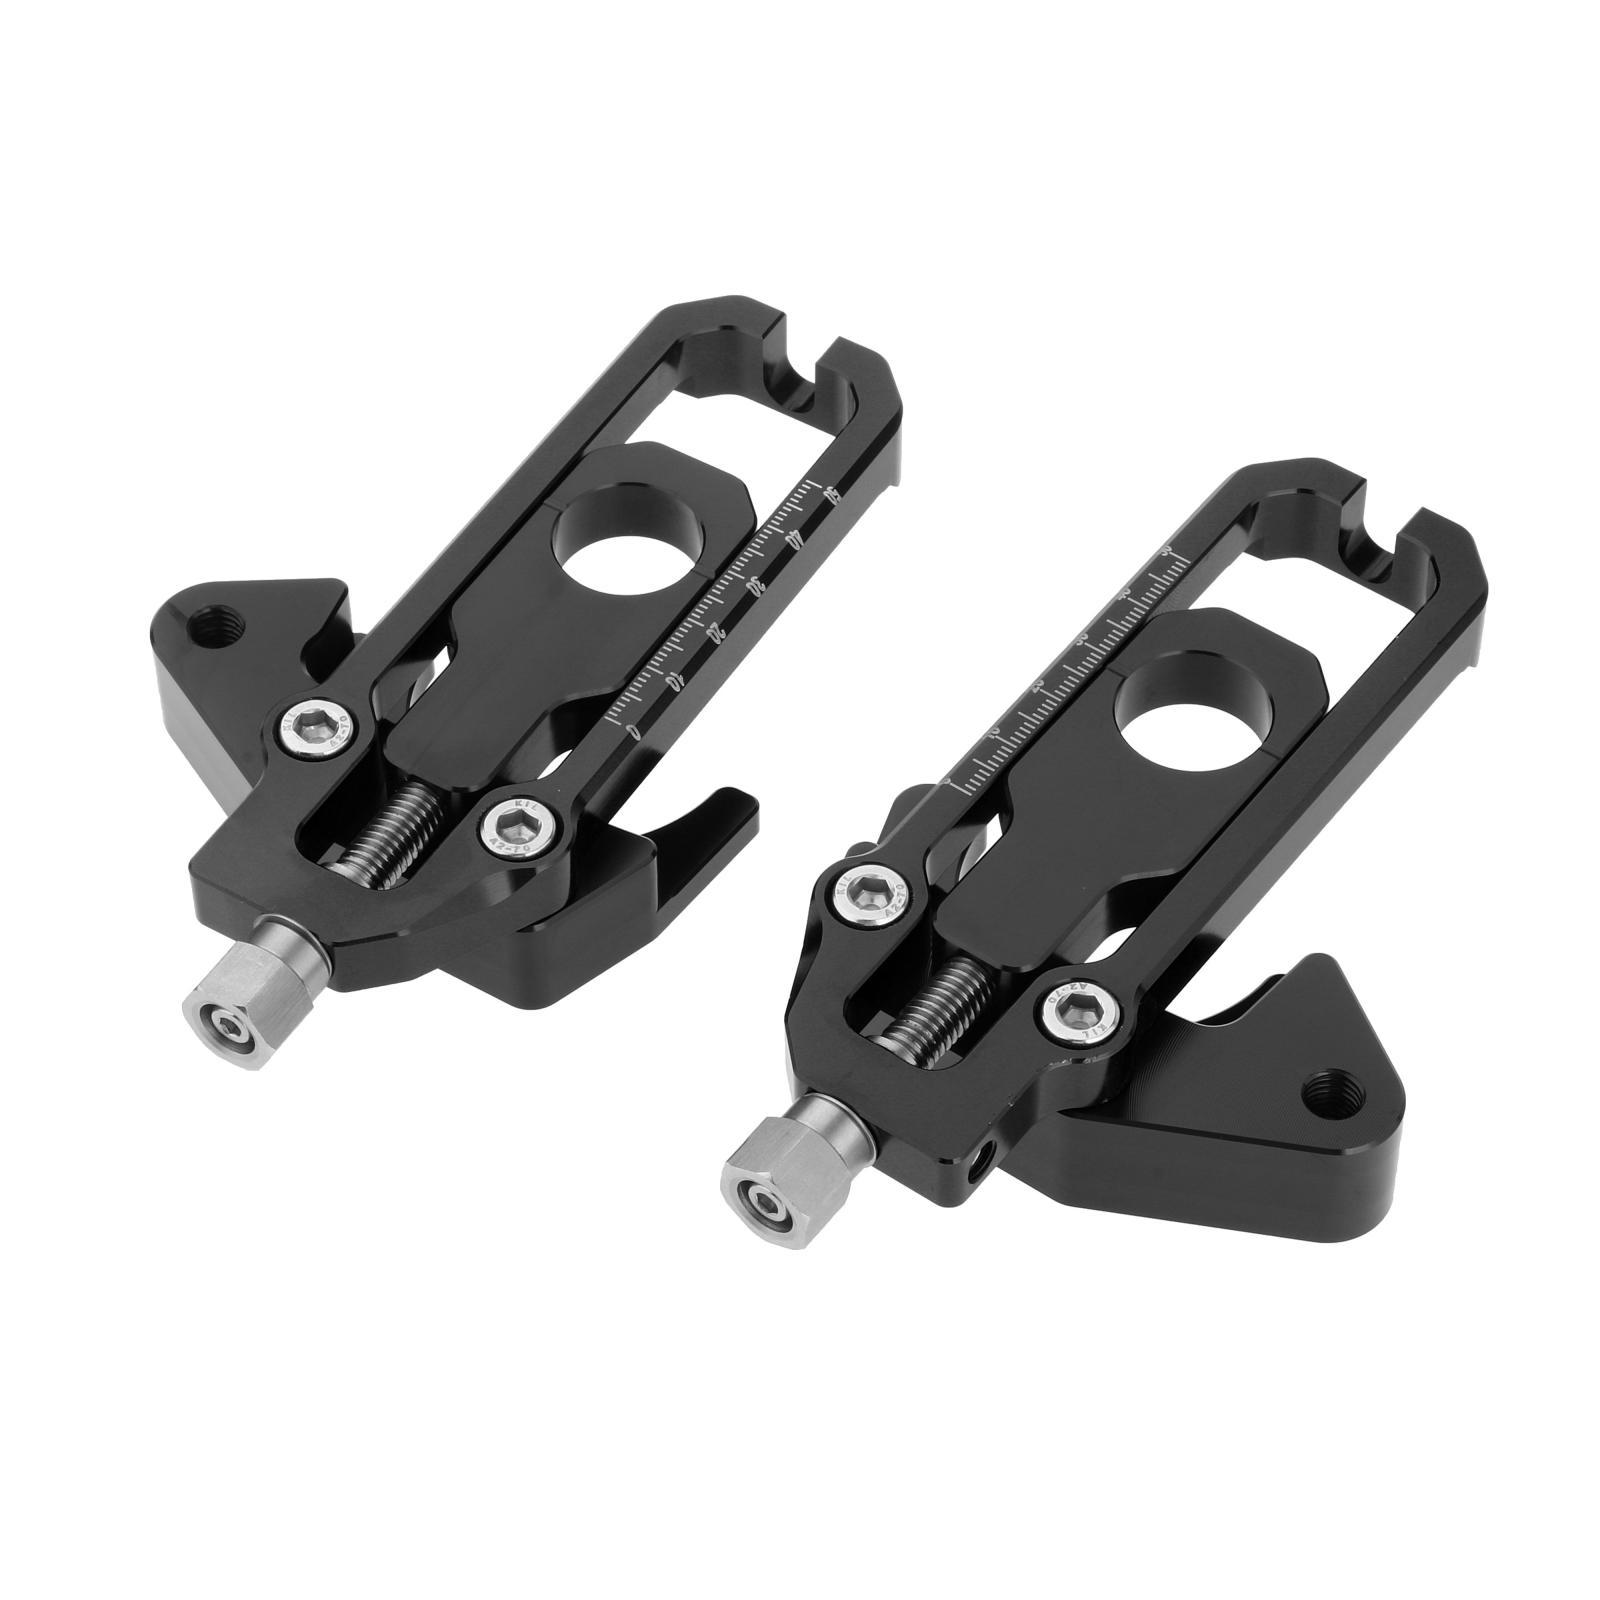 Motorcycle Chain Adjusters Tensioners for Honda CB650R CBR650R 2019 2020, Professional Accessories